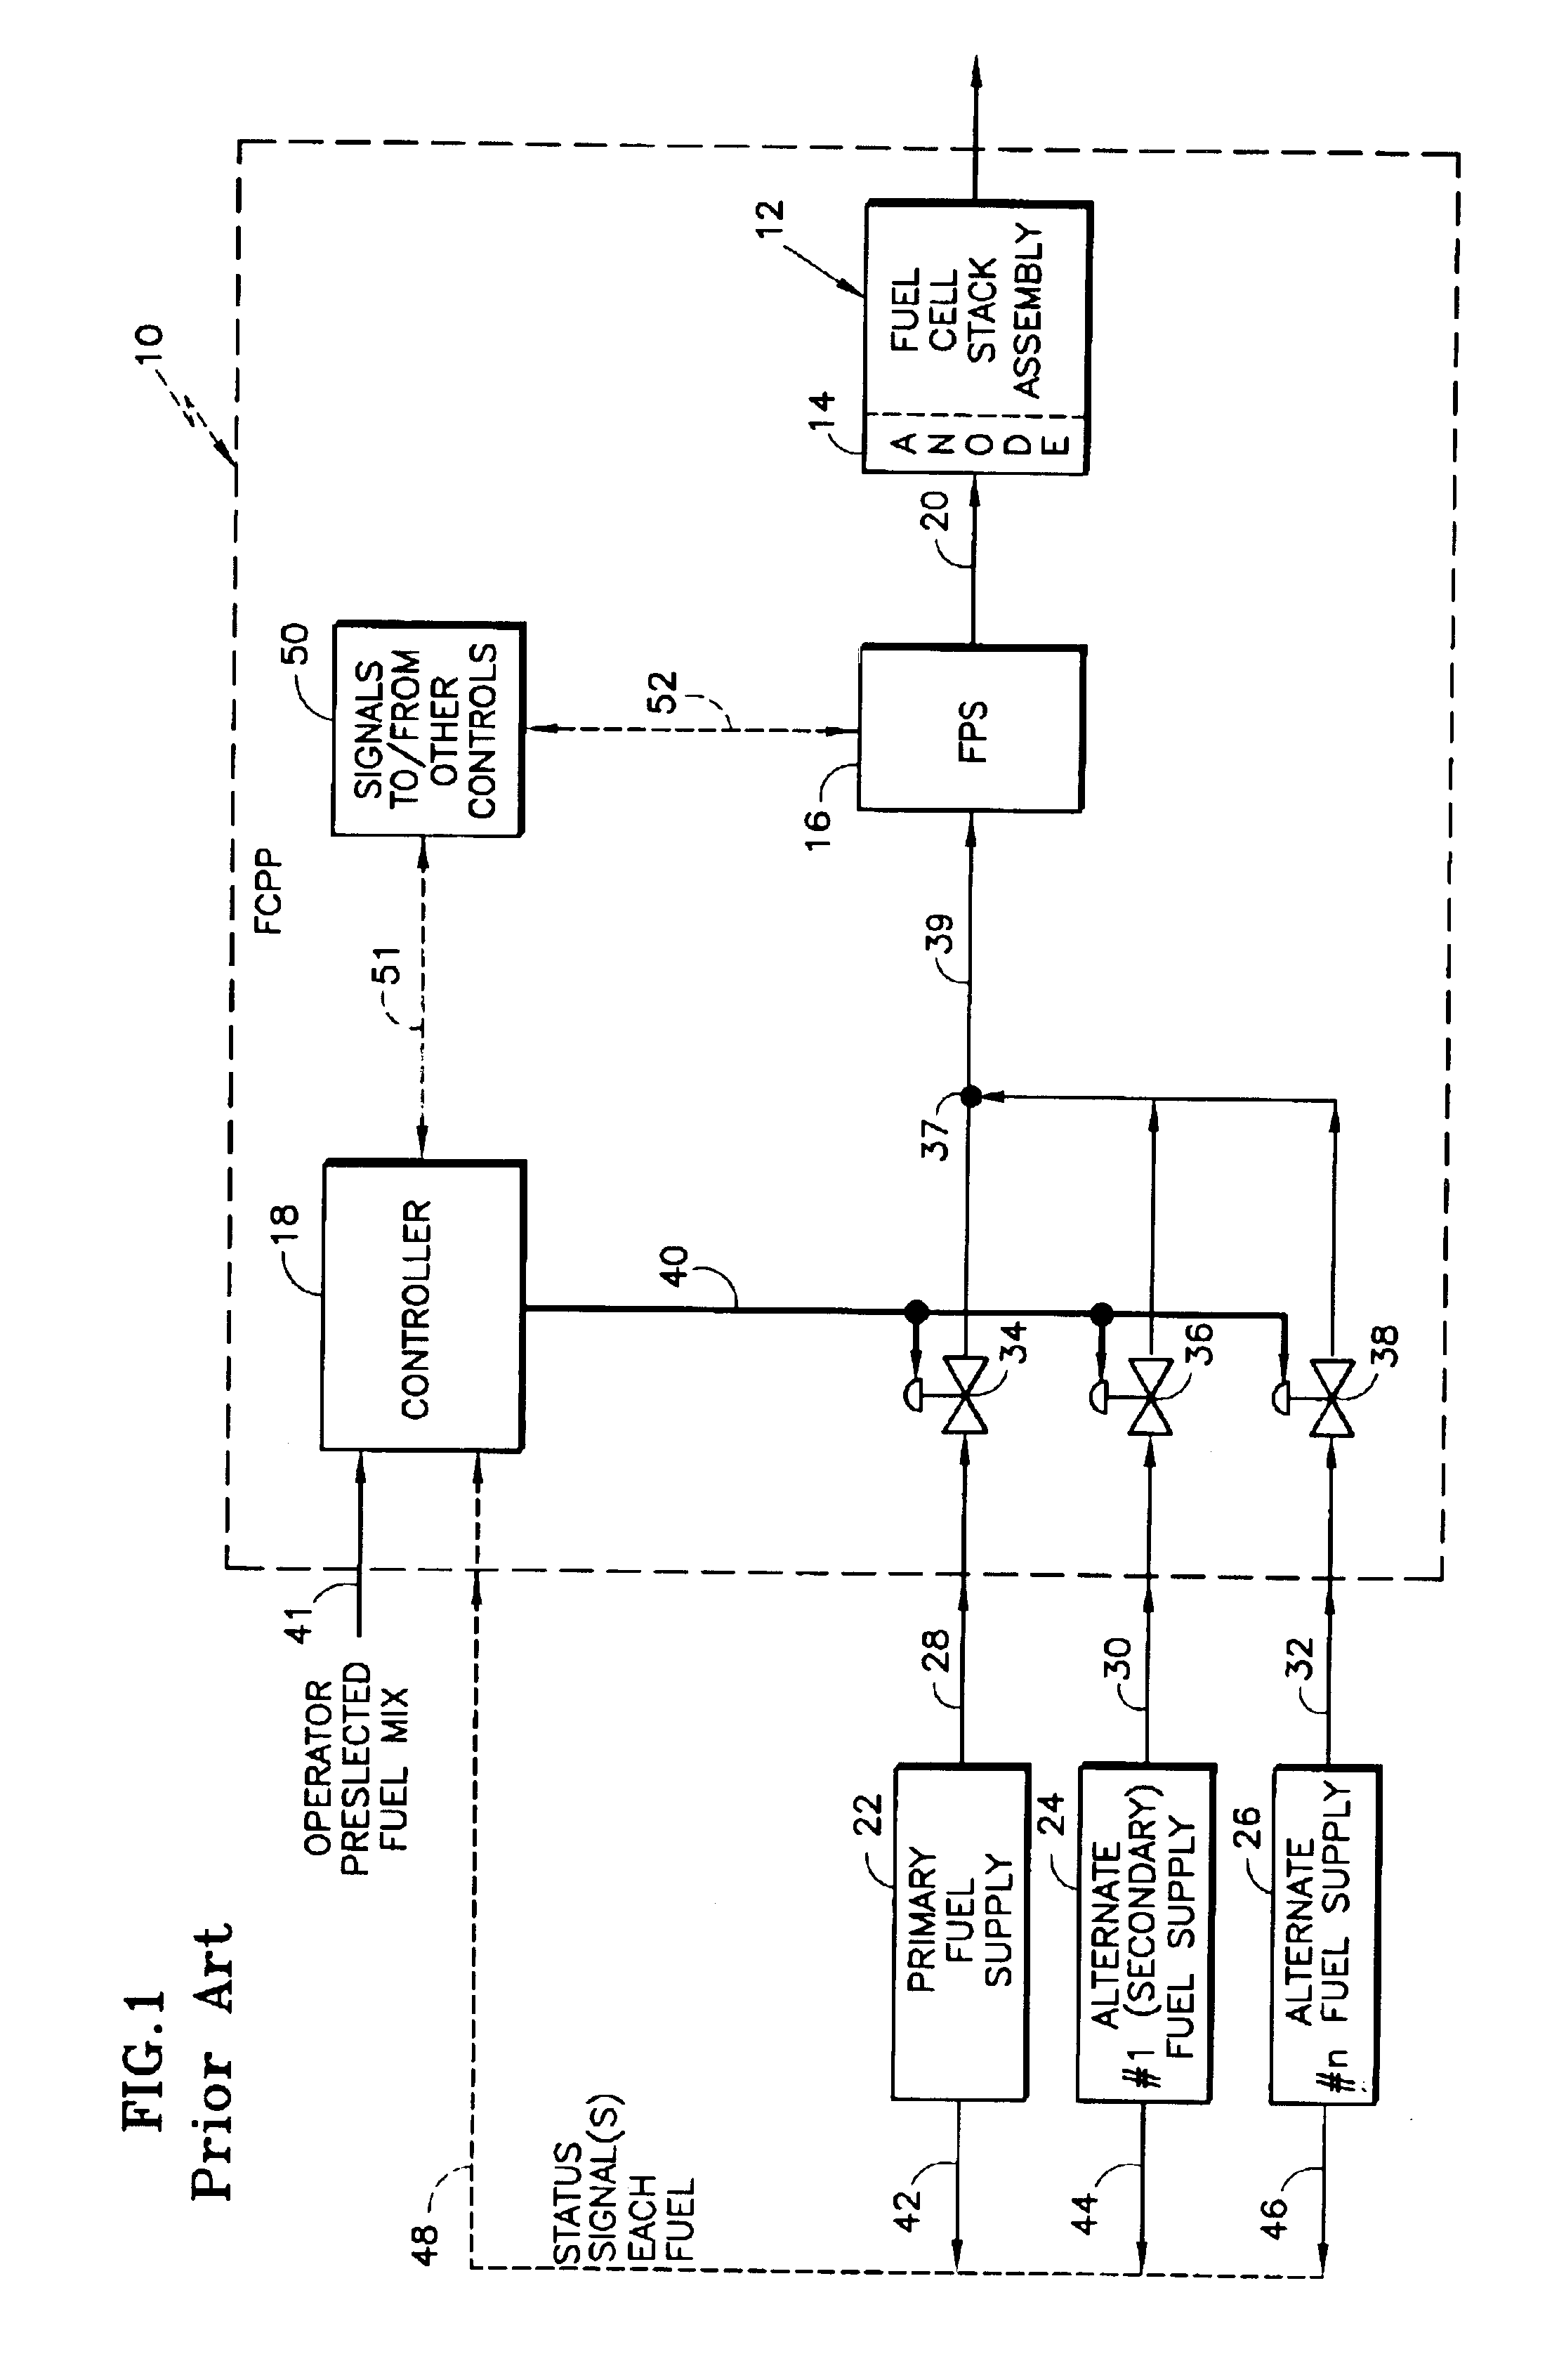 Fuel mixing control for fuel cell power plants operating on multiple fuels